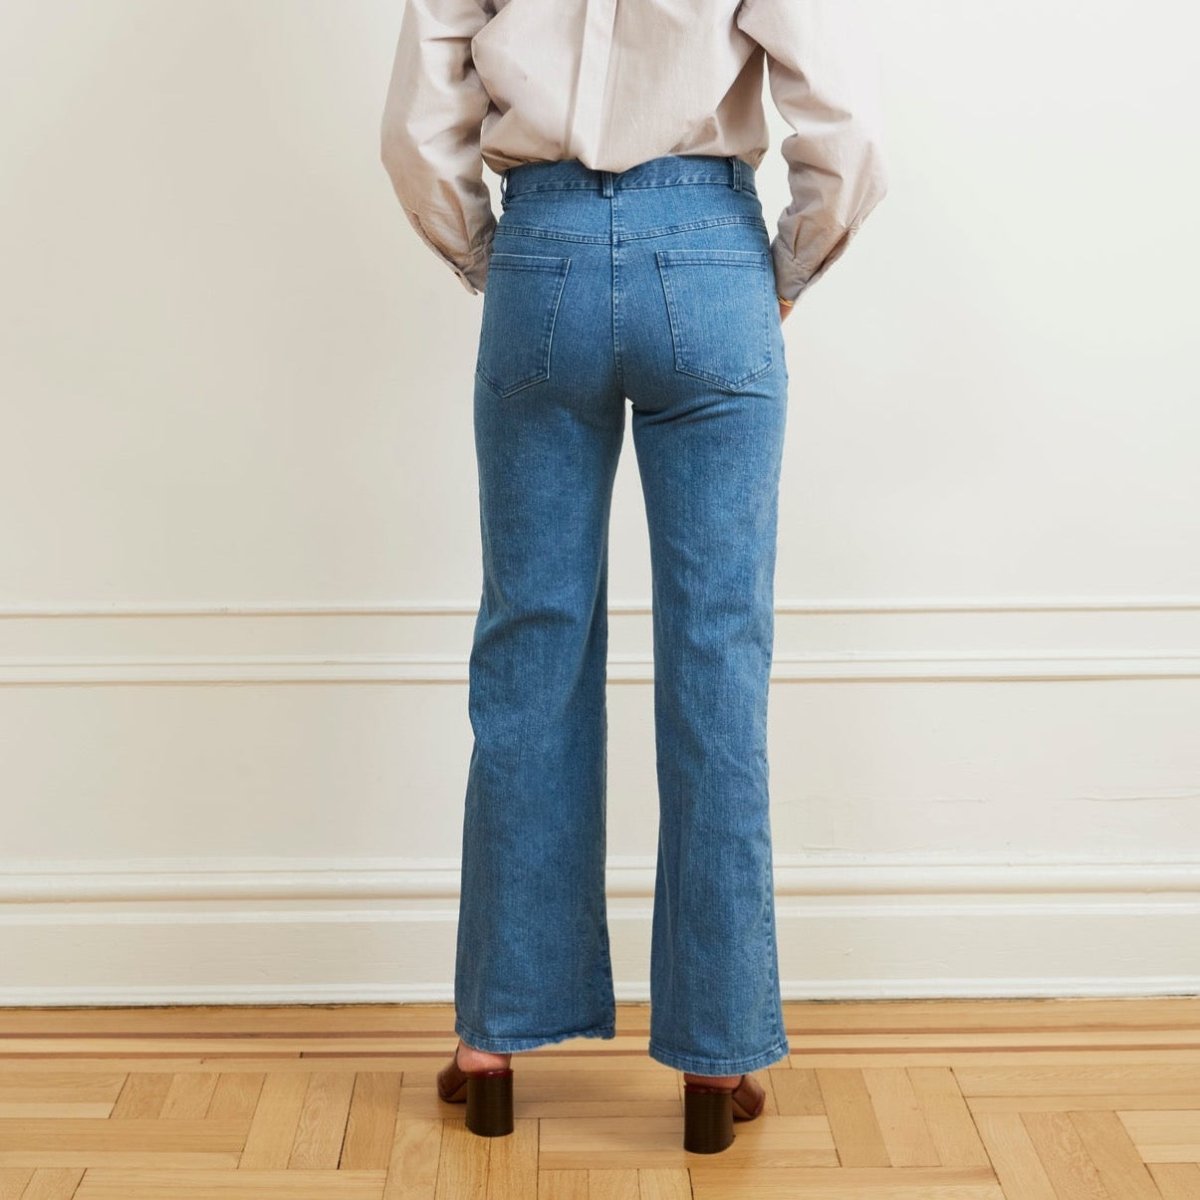 A model shows the backside of a light blue denim jean with a slight boot flare at the bottom. The Marie Jeans in Light Indigo are designed and made by Loup in New York City, USA.